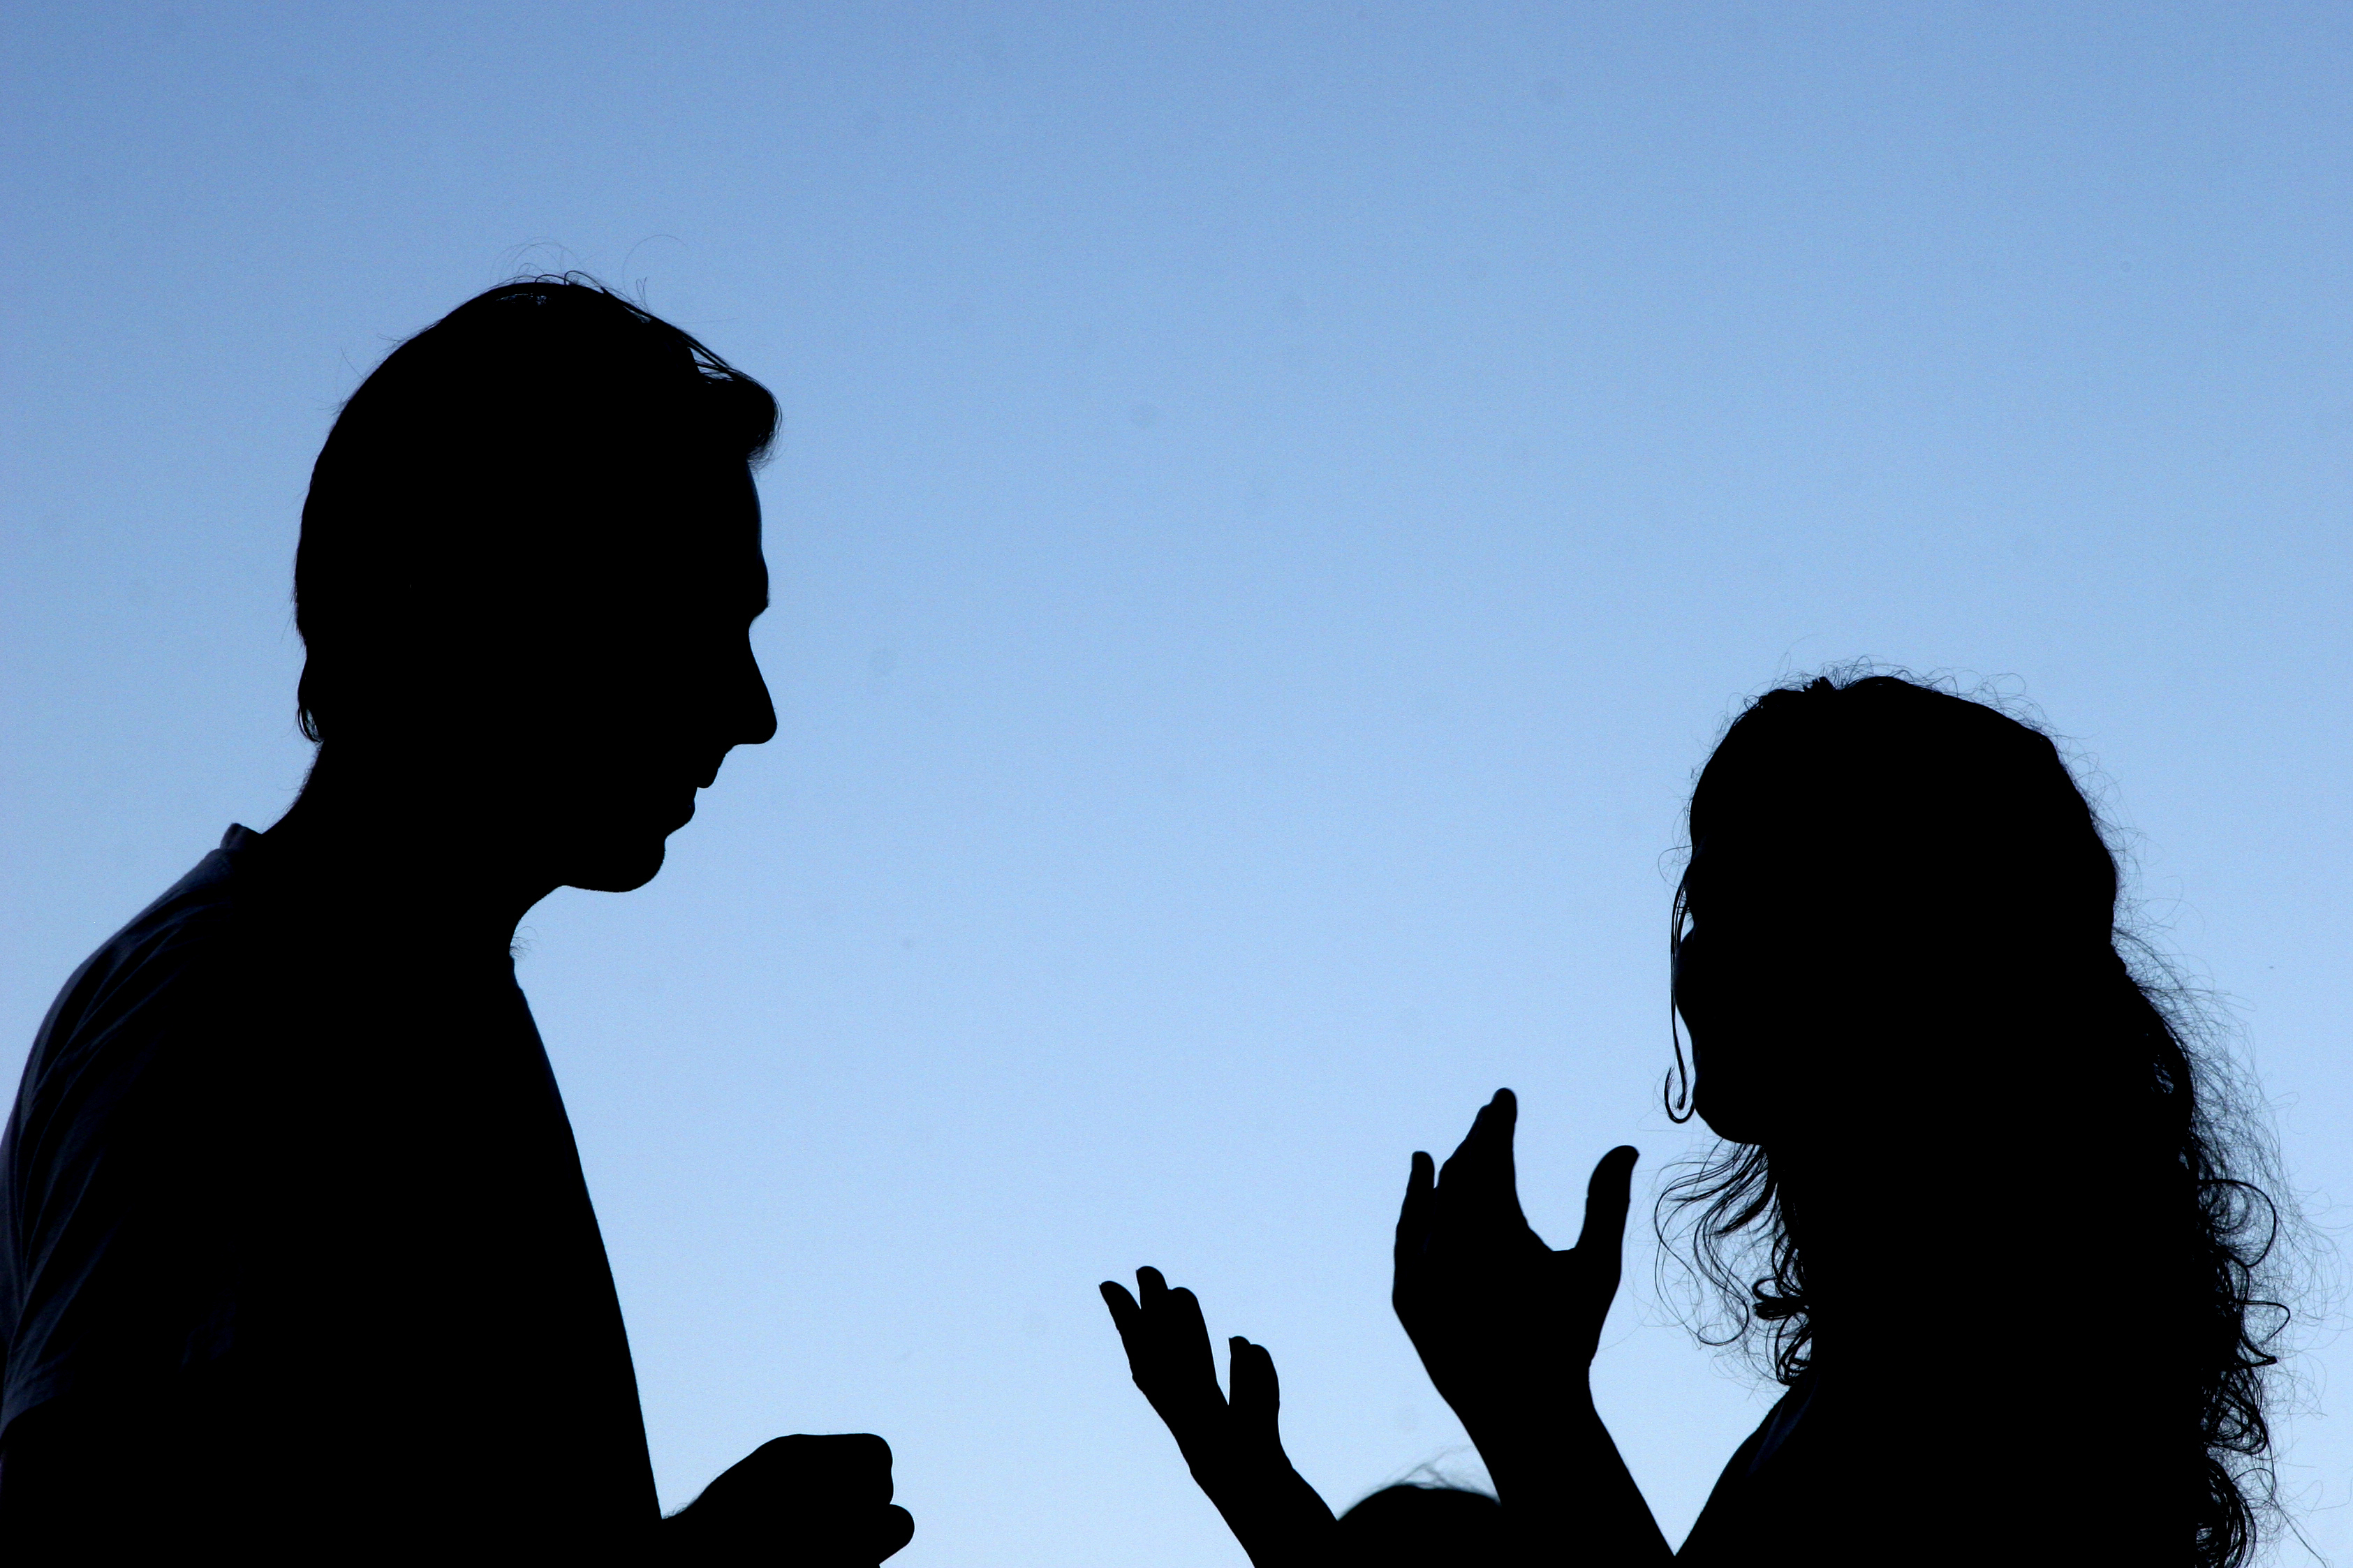 A man and woman arguing | Source: Getty Images